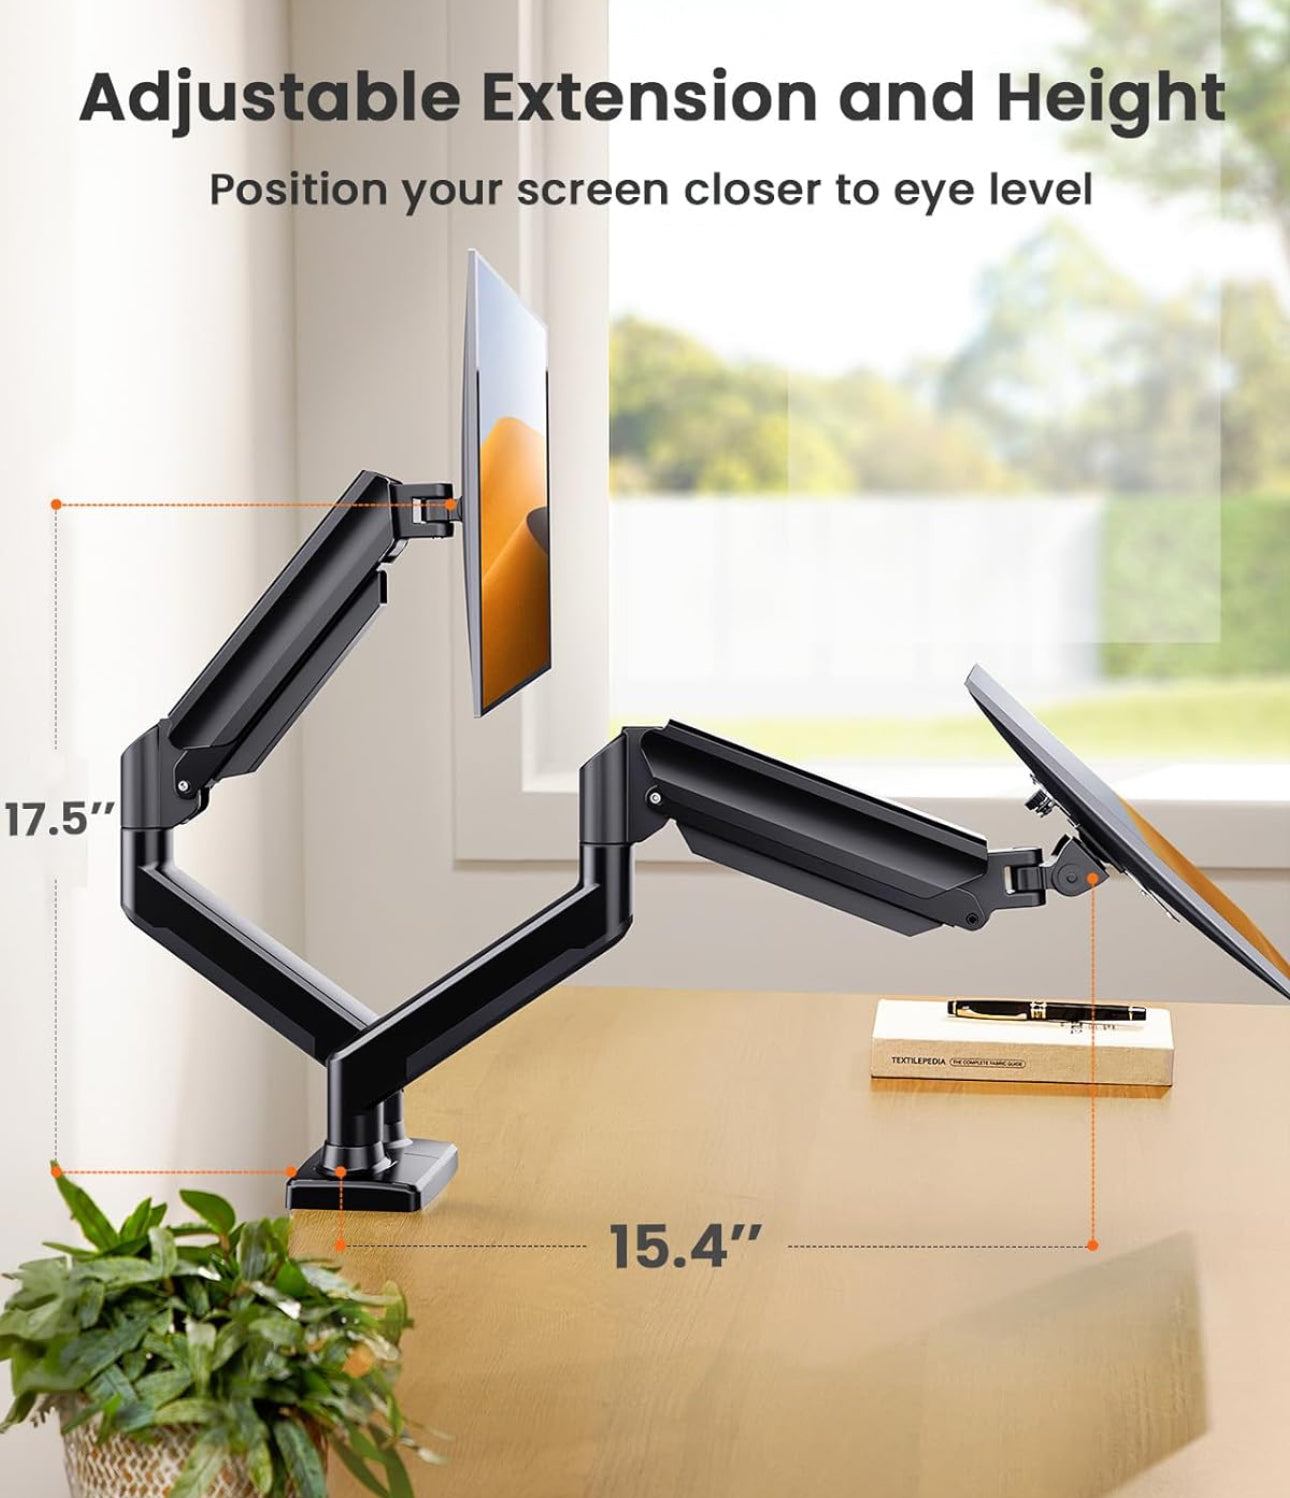 ErGear Dual Monitor Mount up to 32 inches Screen, Max 22 lbs Each Arm, Adjustable Dual Monitor Stand, Sturdy Steel Dual Monitor Arm with 180degree Swivel, Tilt, 360degree Rotation for Home Office, VESA 75/100mm